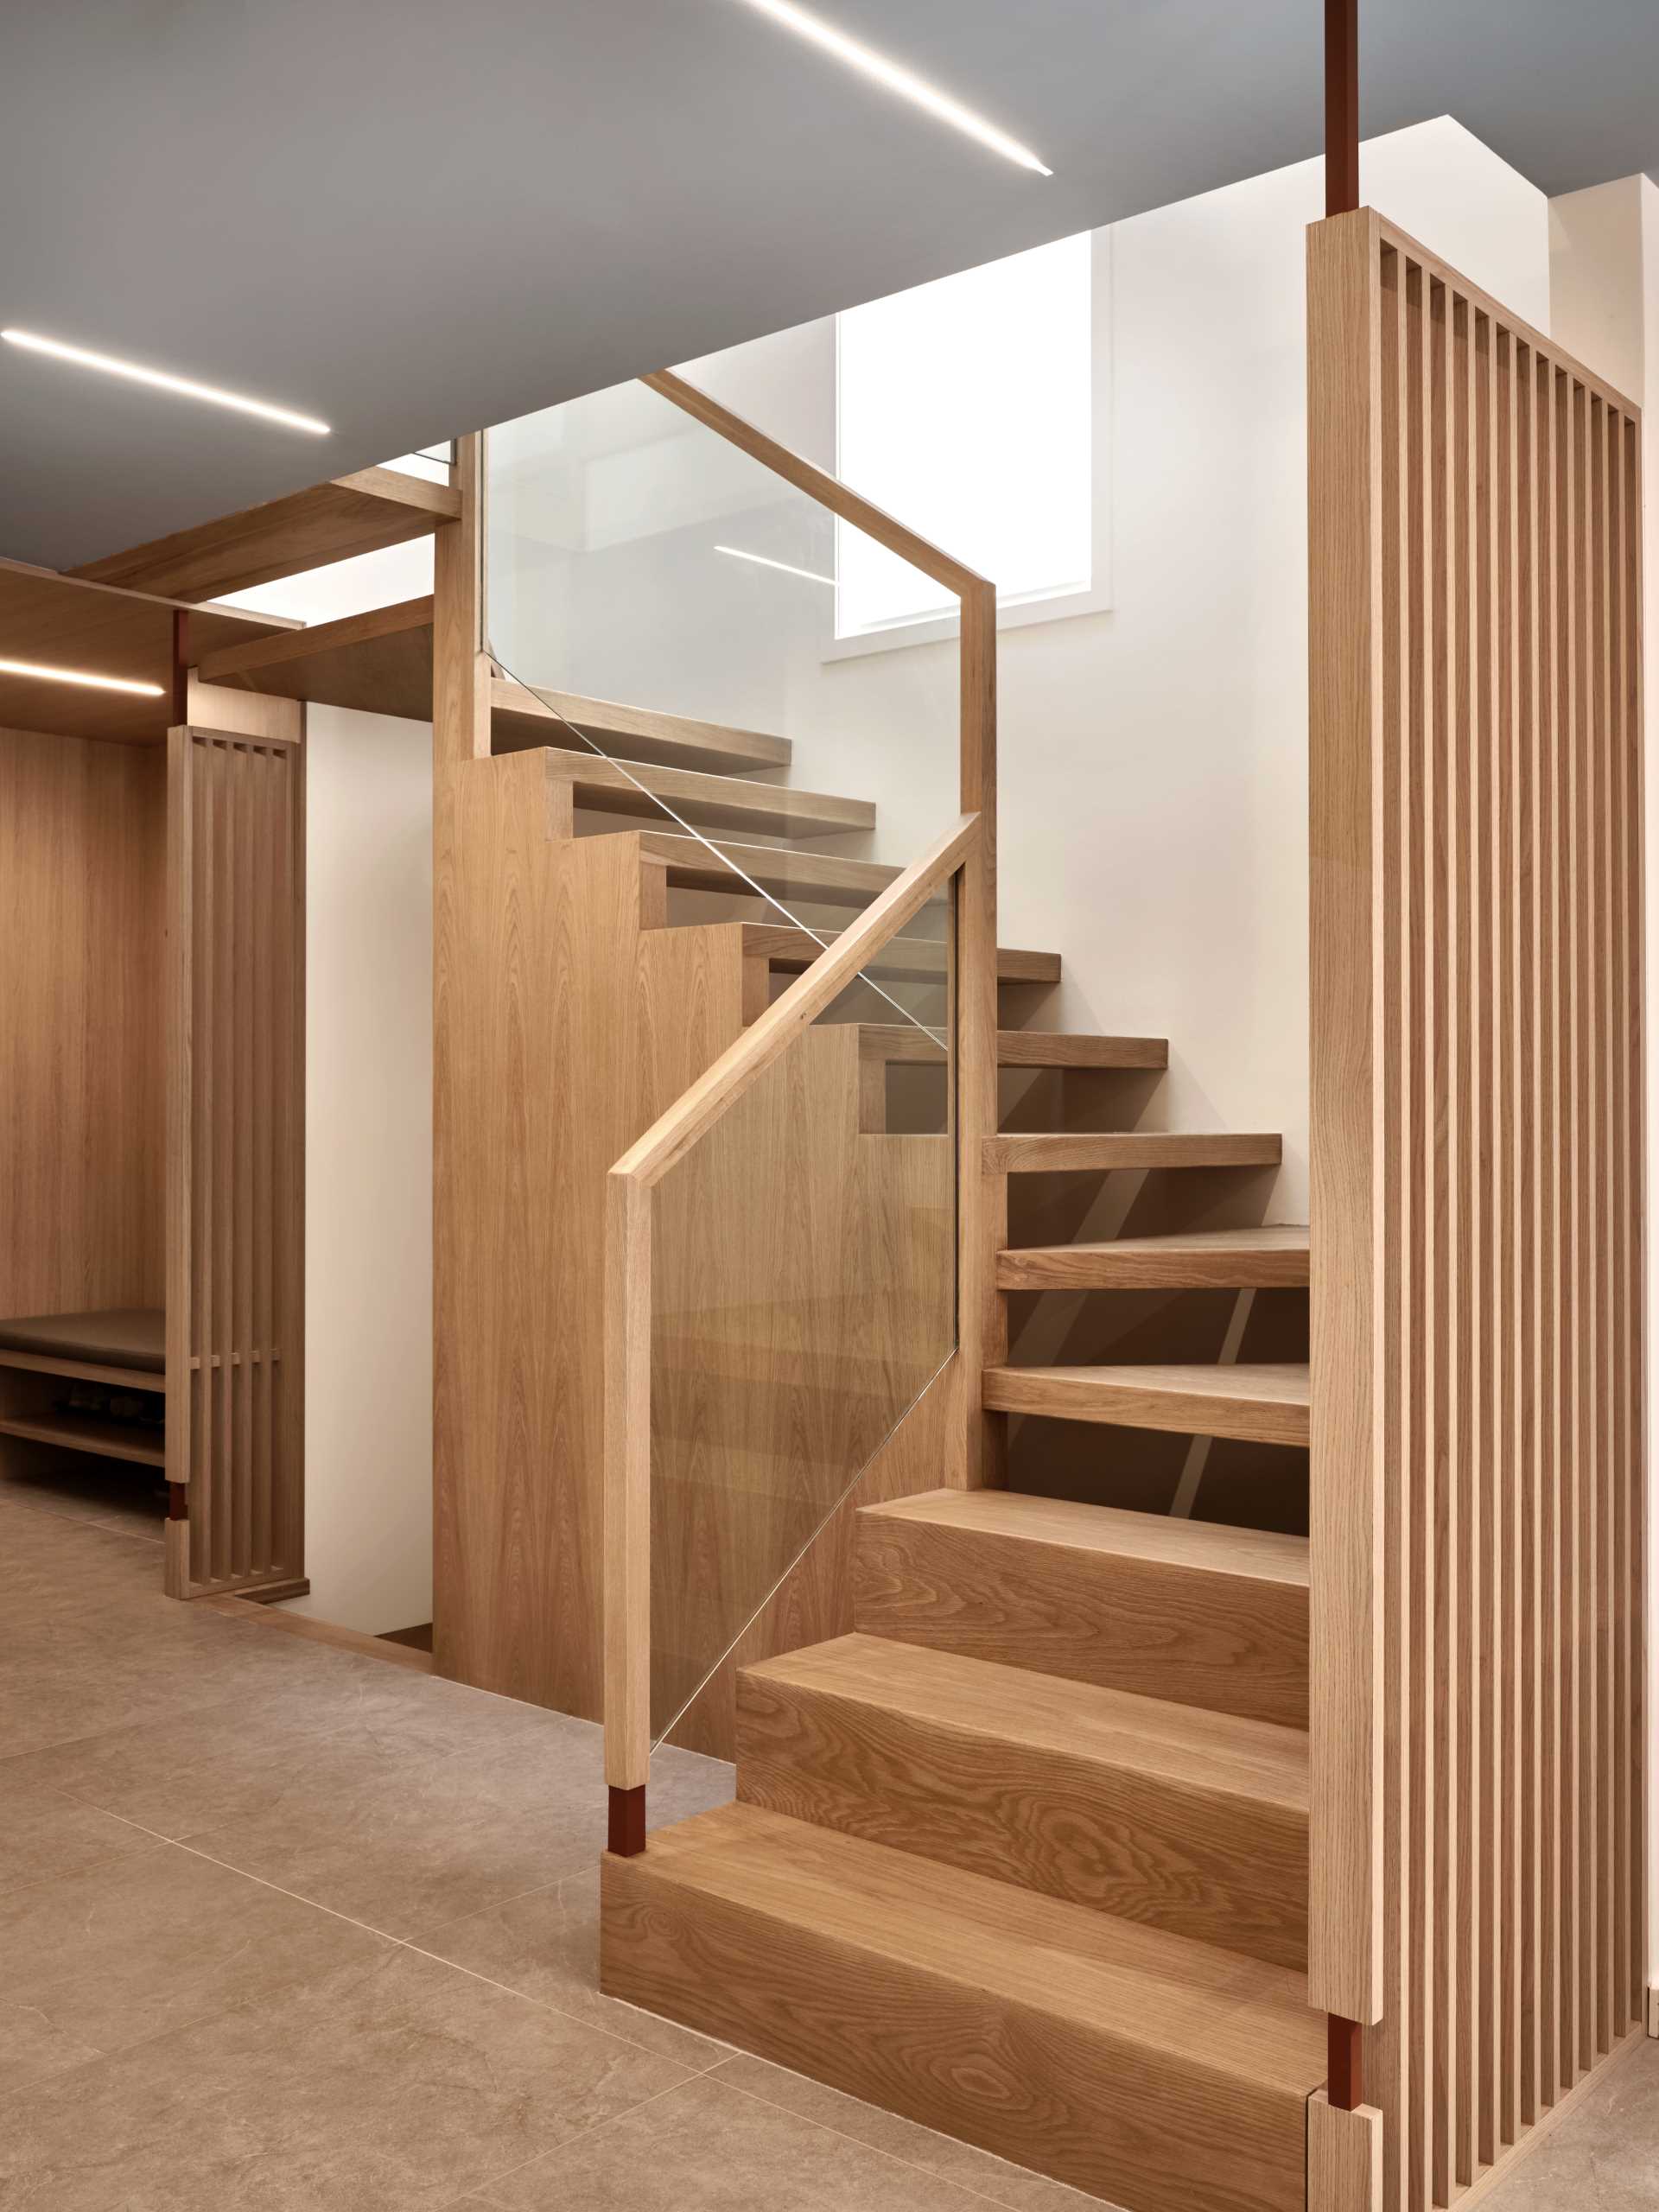 A floating staircase, which is by the foyer, combines wood and glass, while the wood panel stair wall not only acts as a privacy panel that marries the structural support of the stair but also captures the shadows casting off the steps.